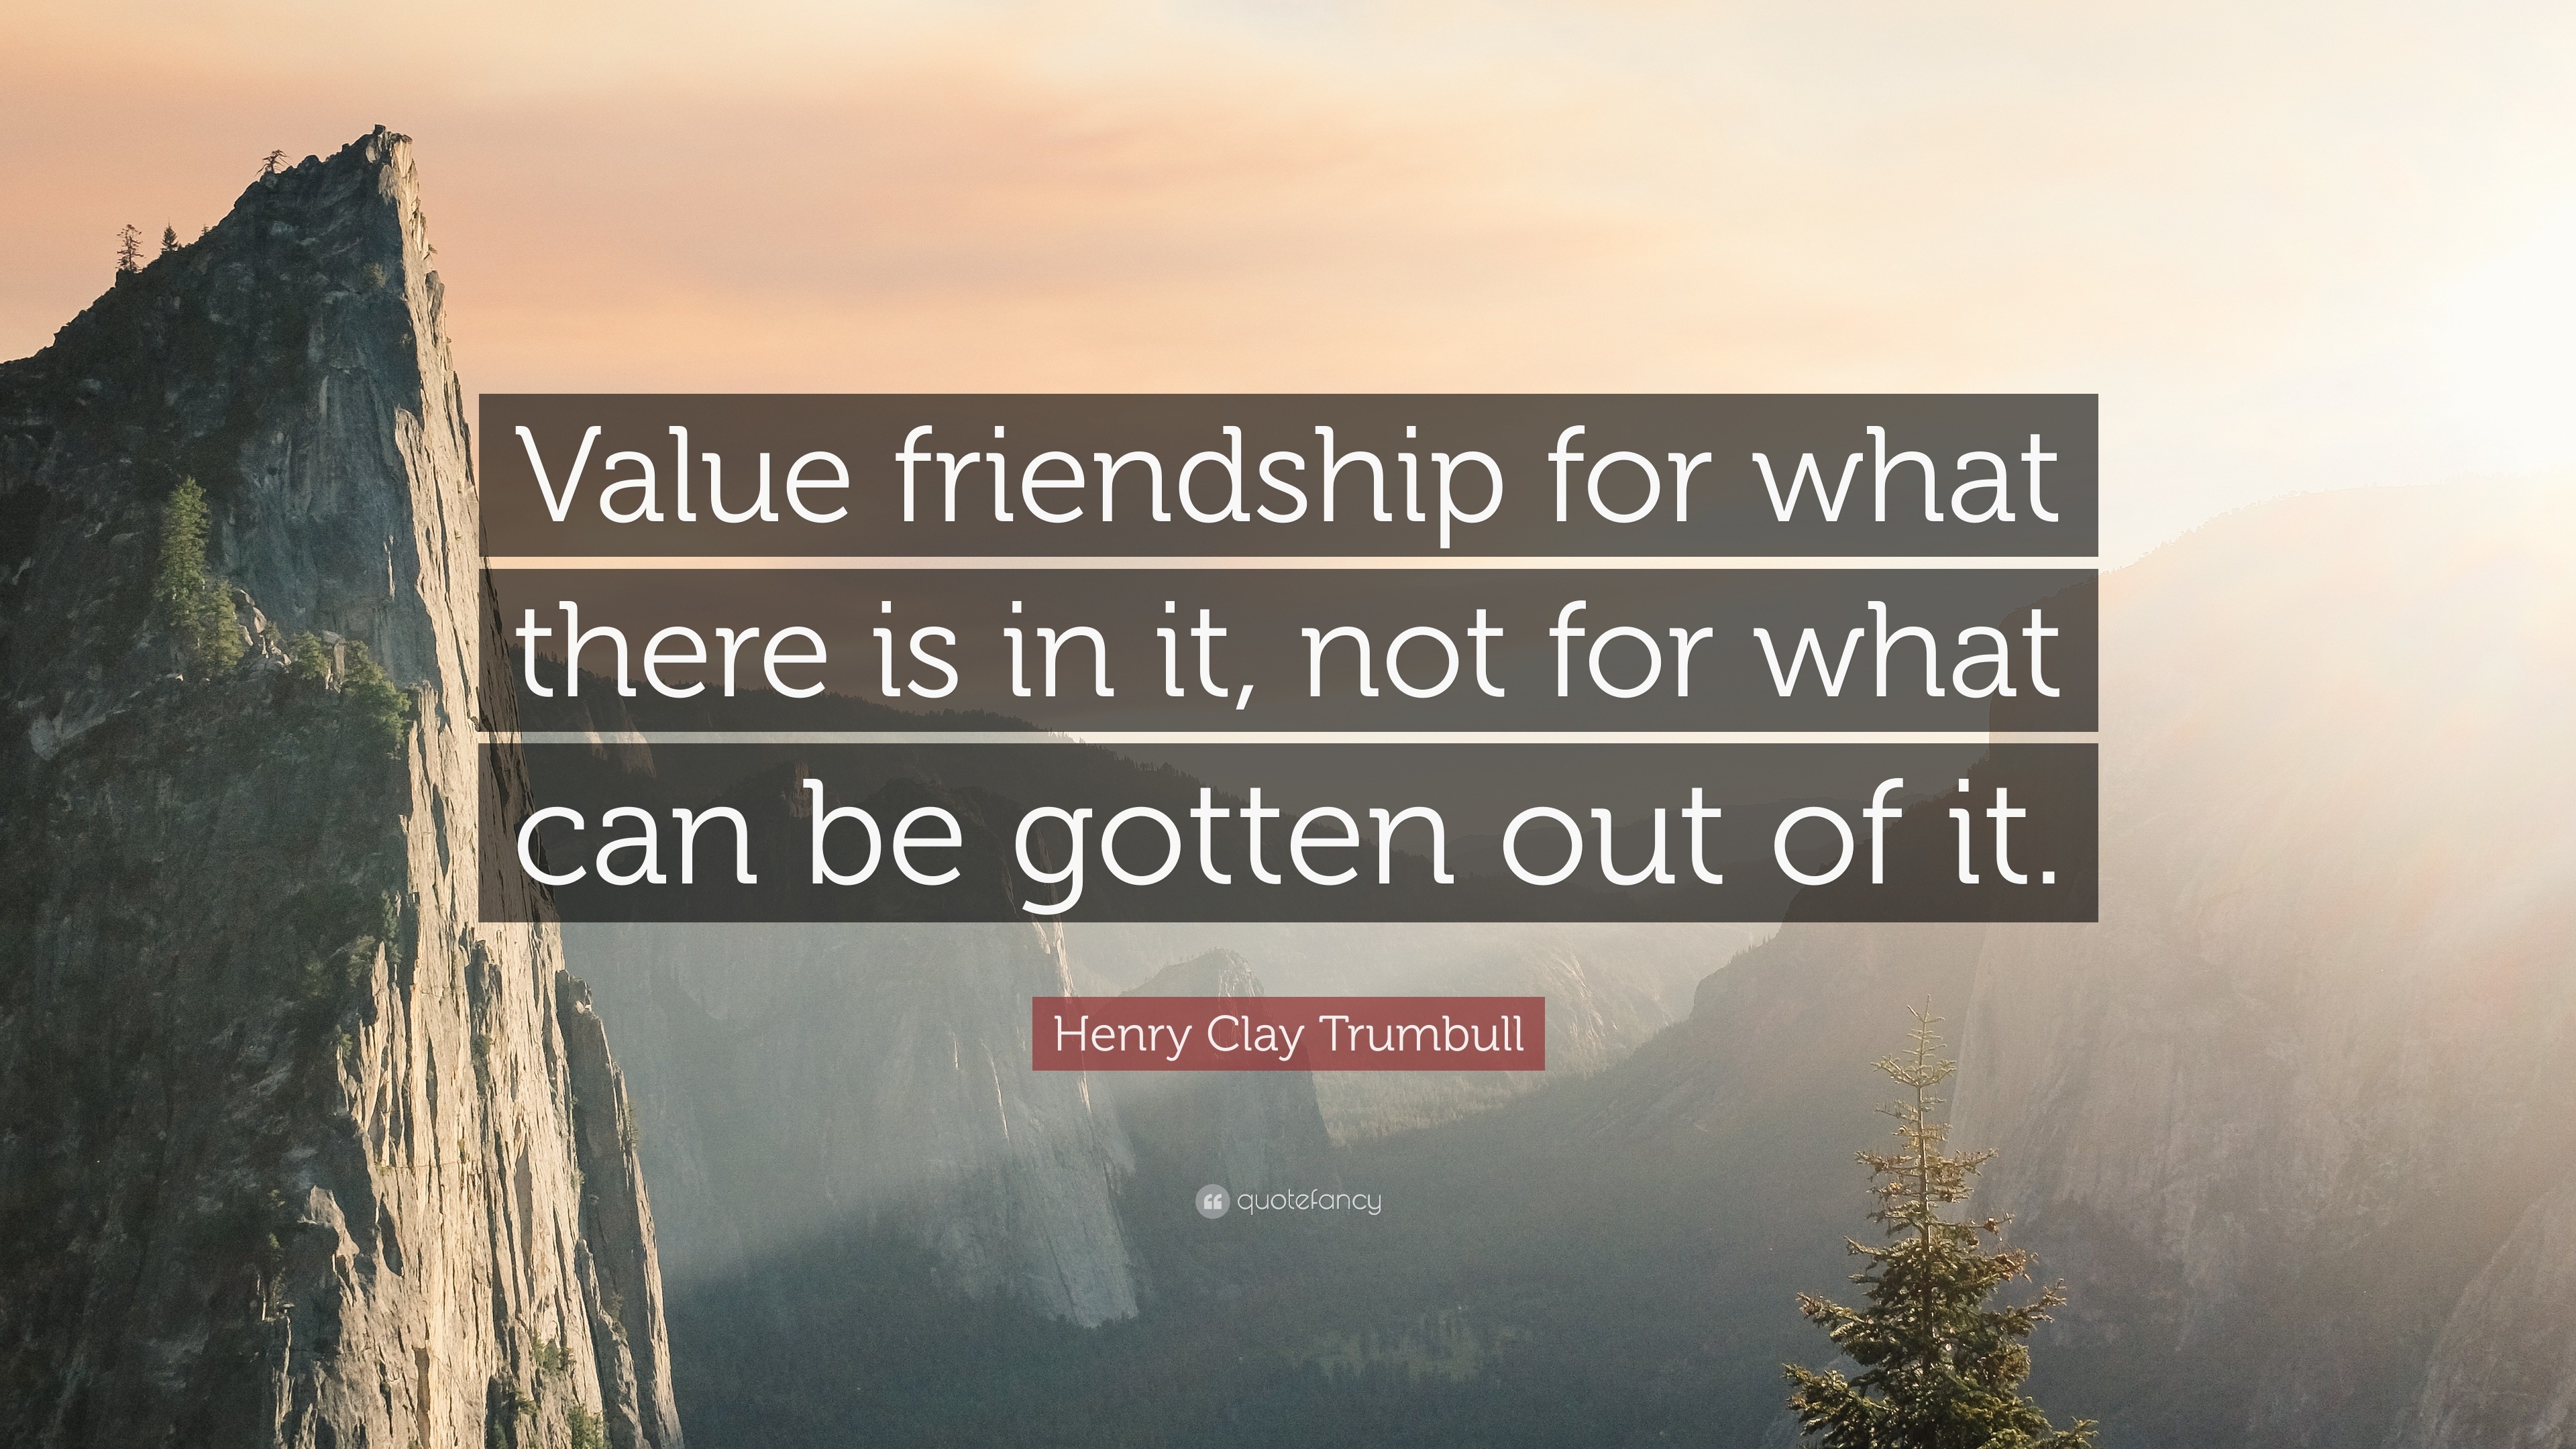 Amazing Value Of Friendship Quotes in the world The ultimate guide 